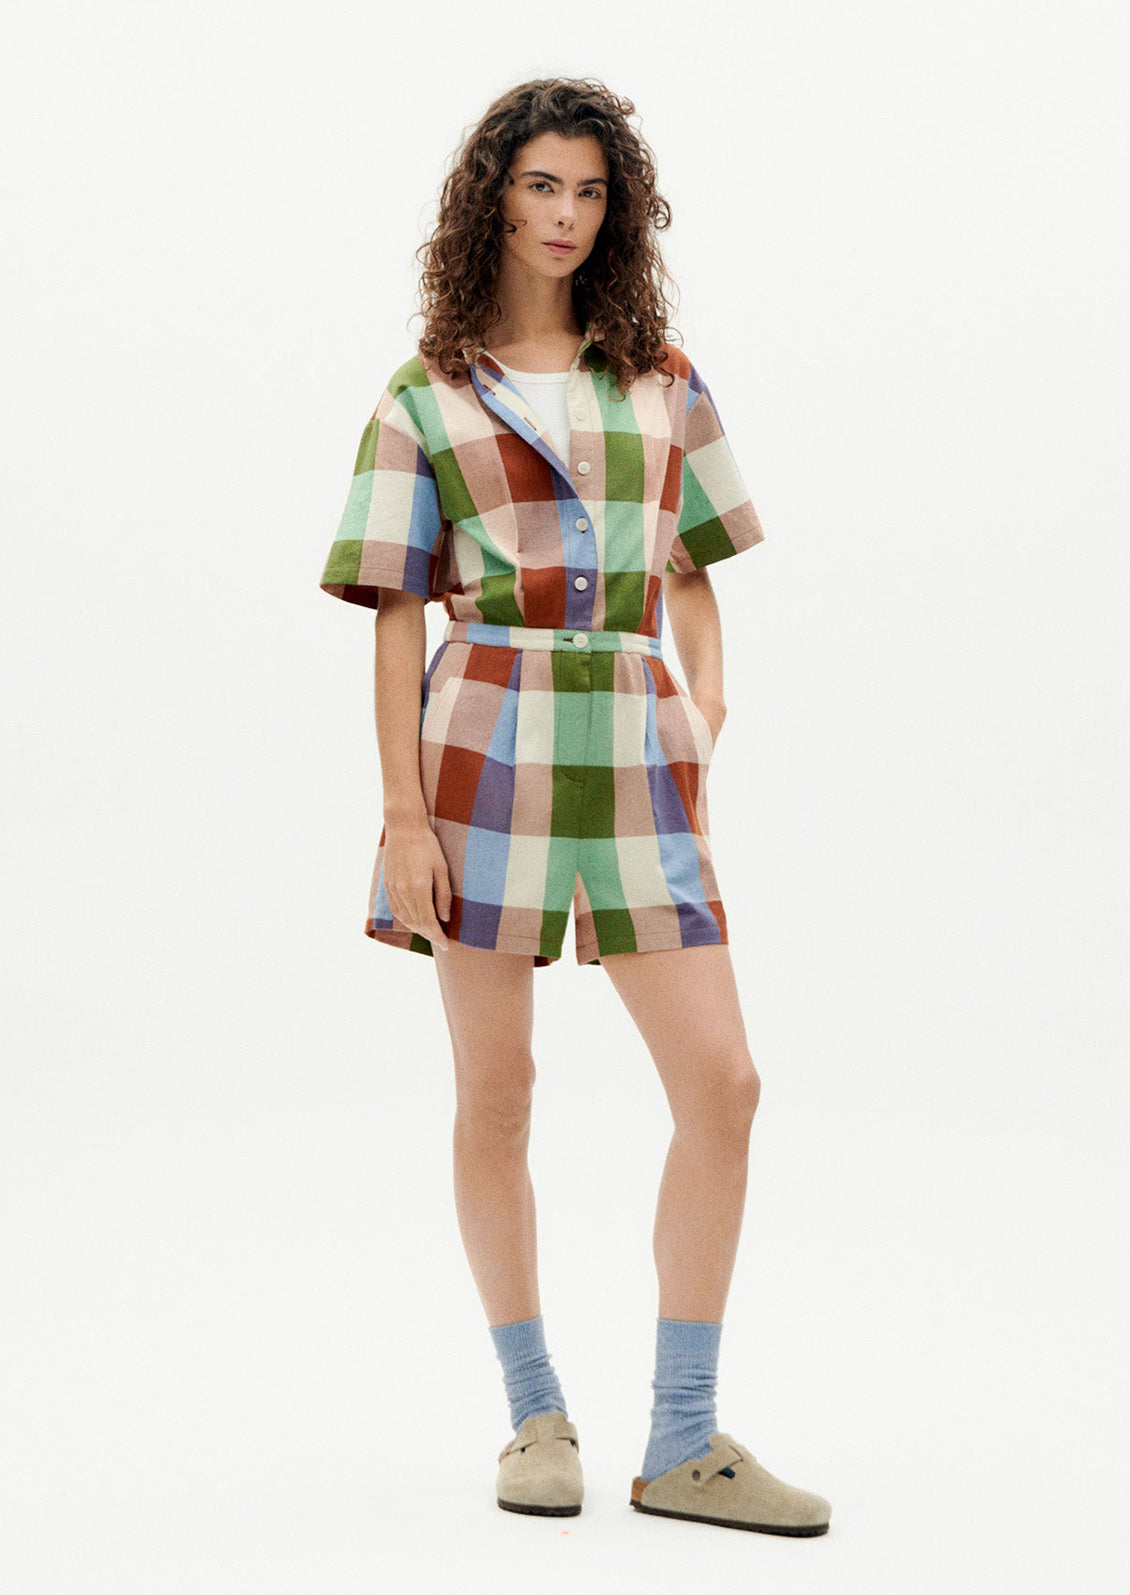 A woman wearing a romper in colorful madras cotton.